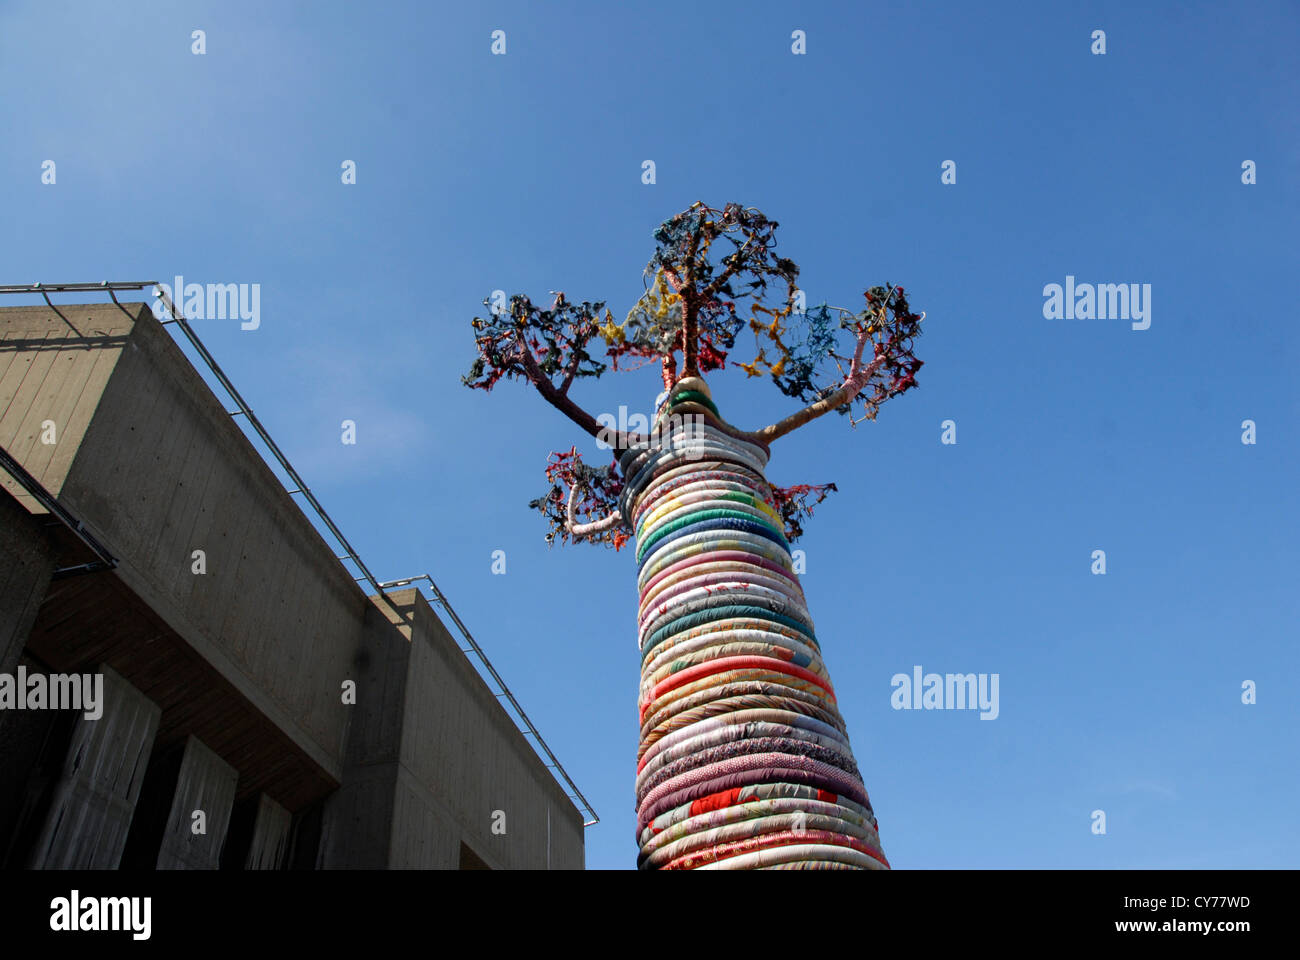 The Pirate Technics Sculpture Under The Baobab installed on the Southbank  as part of the Festival of the World festivaLondon UK Stock Photo